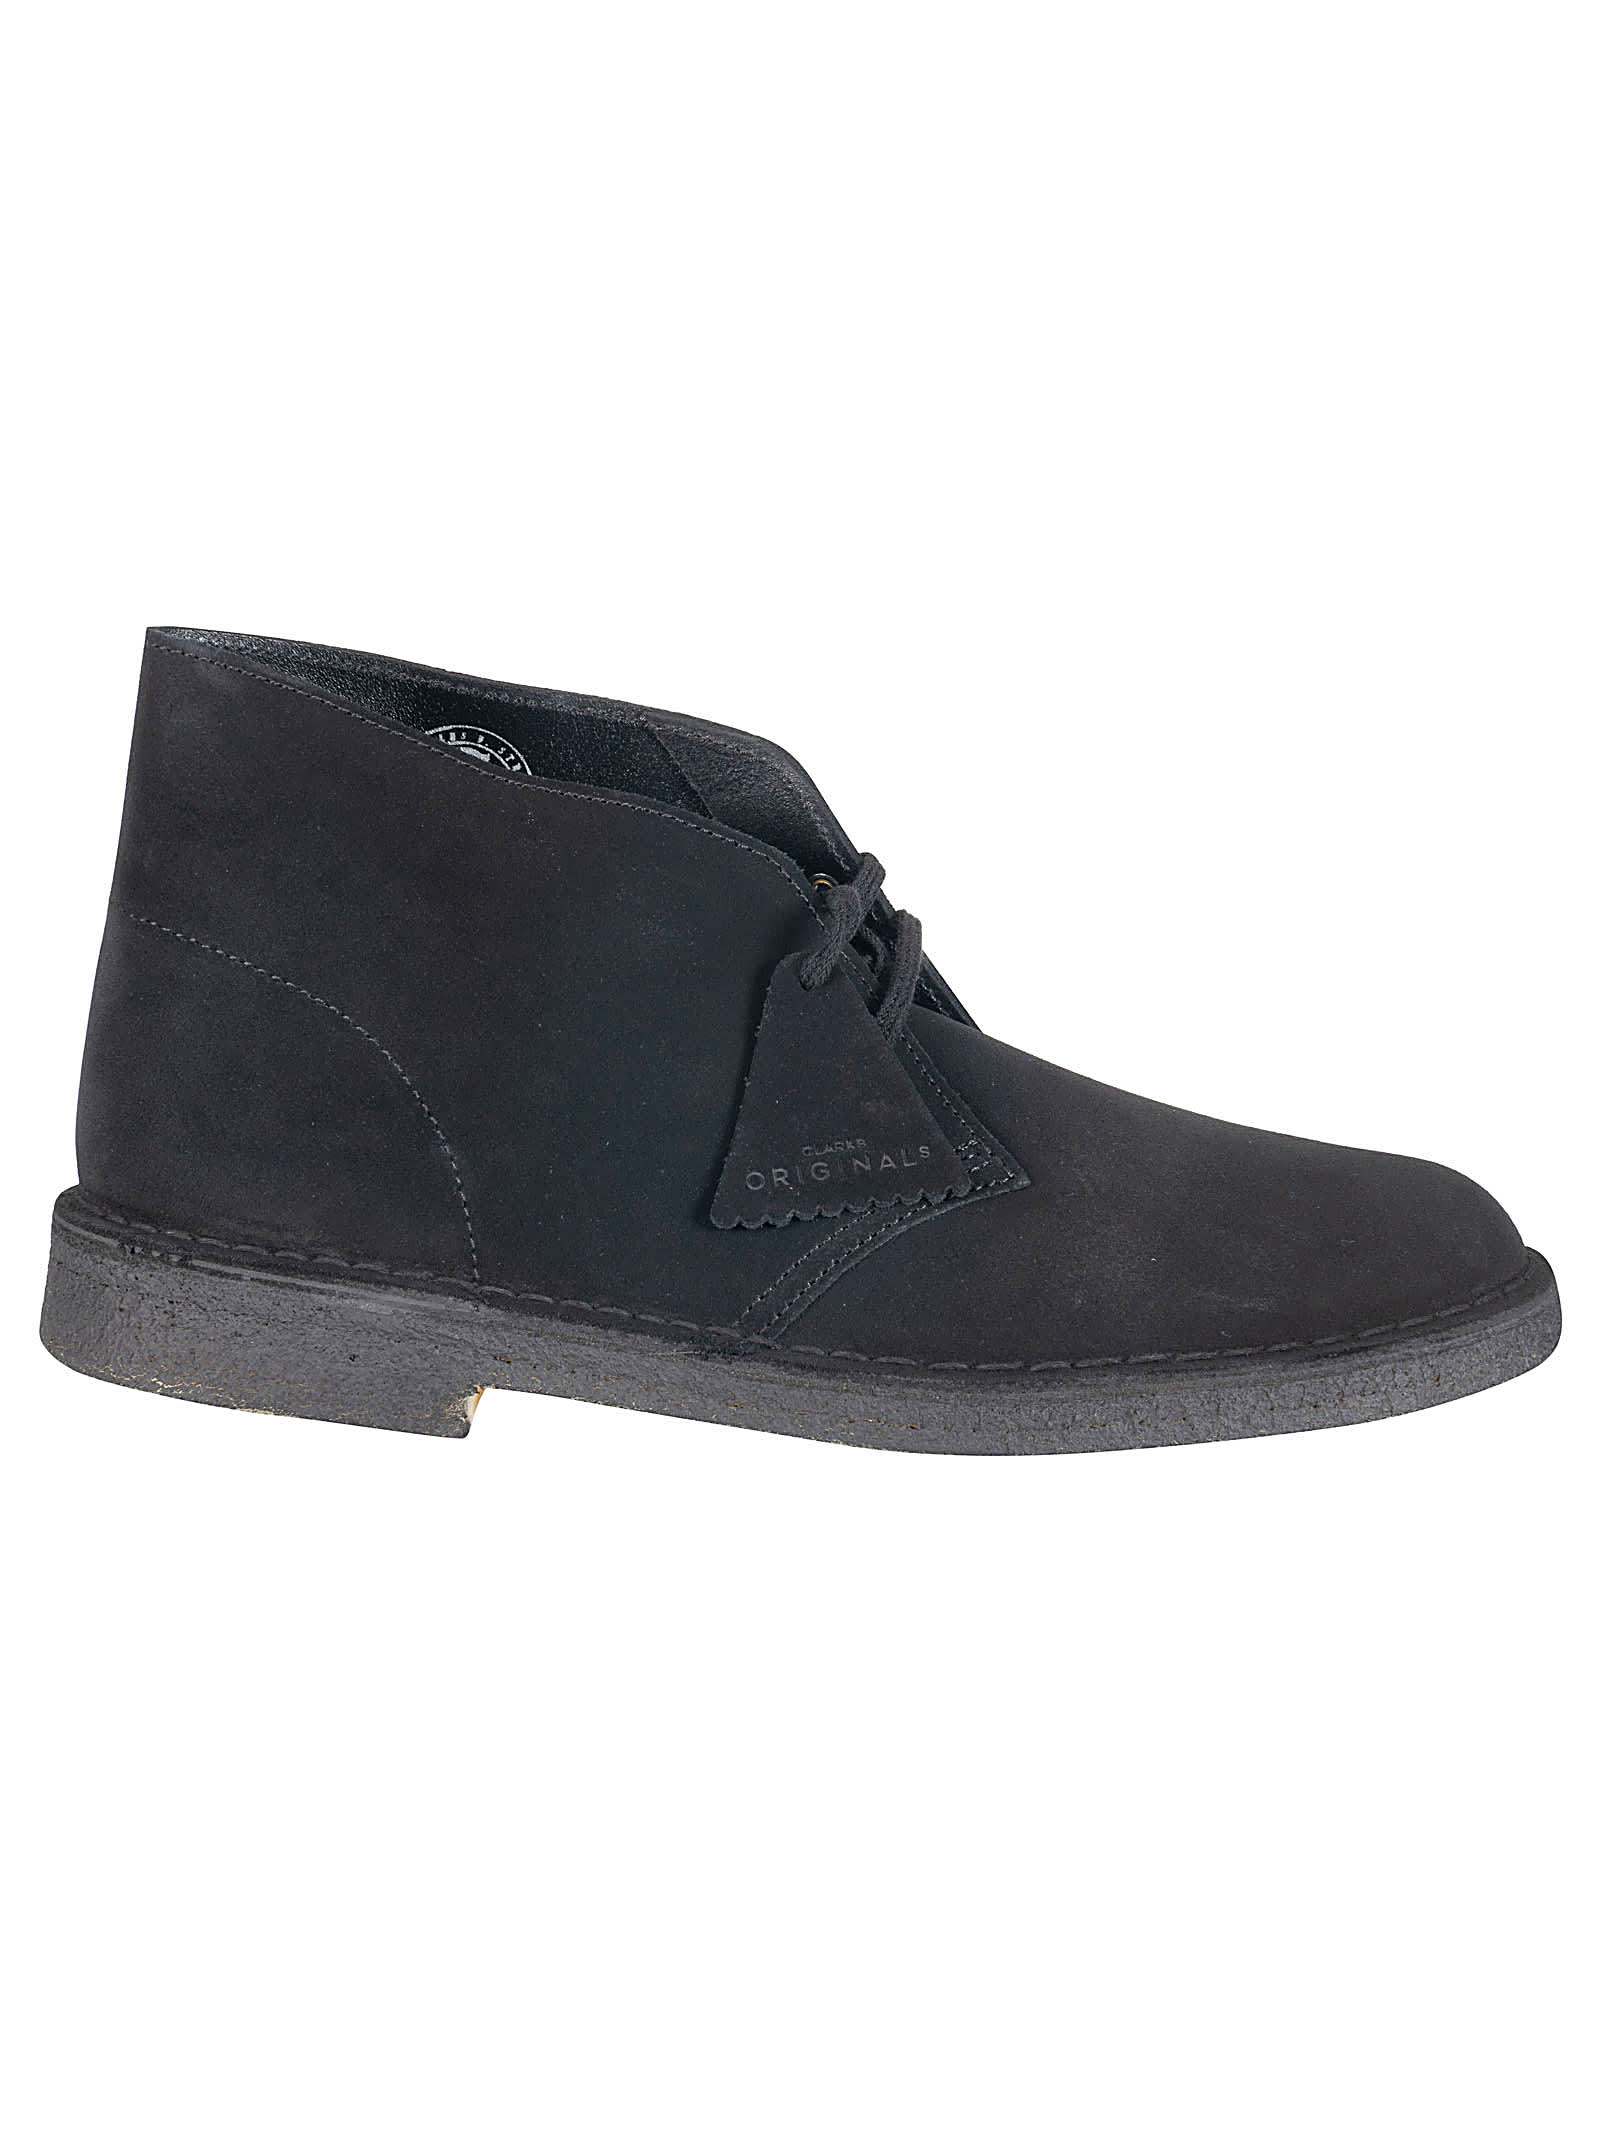 CLARKS CLASSIC ANKLE BOOTS,138227 BLACK